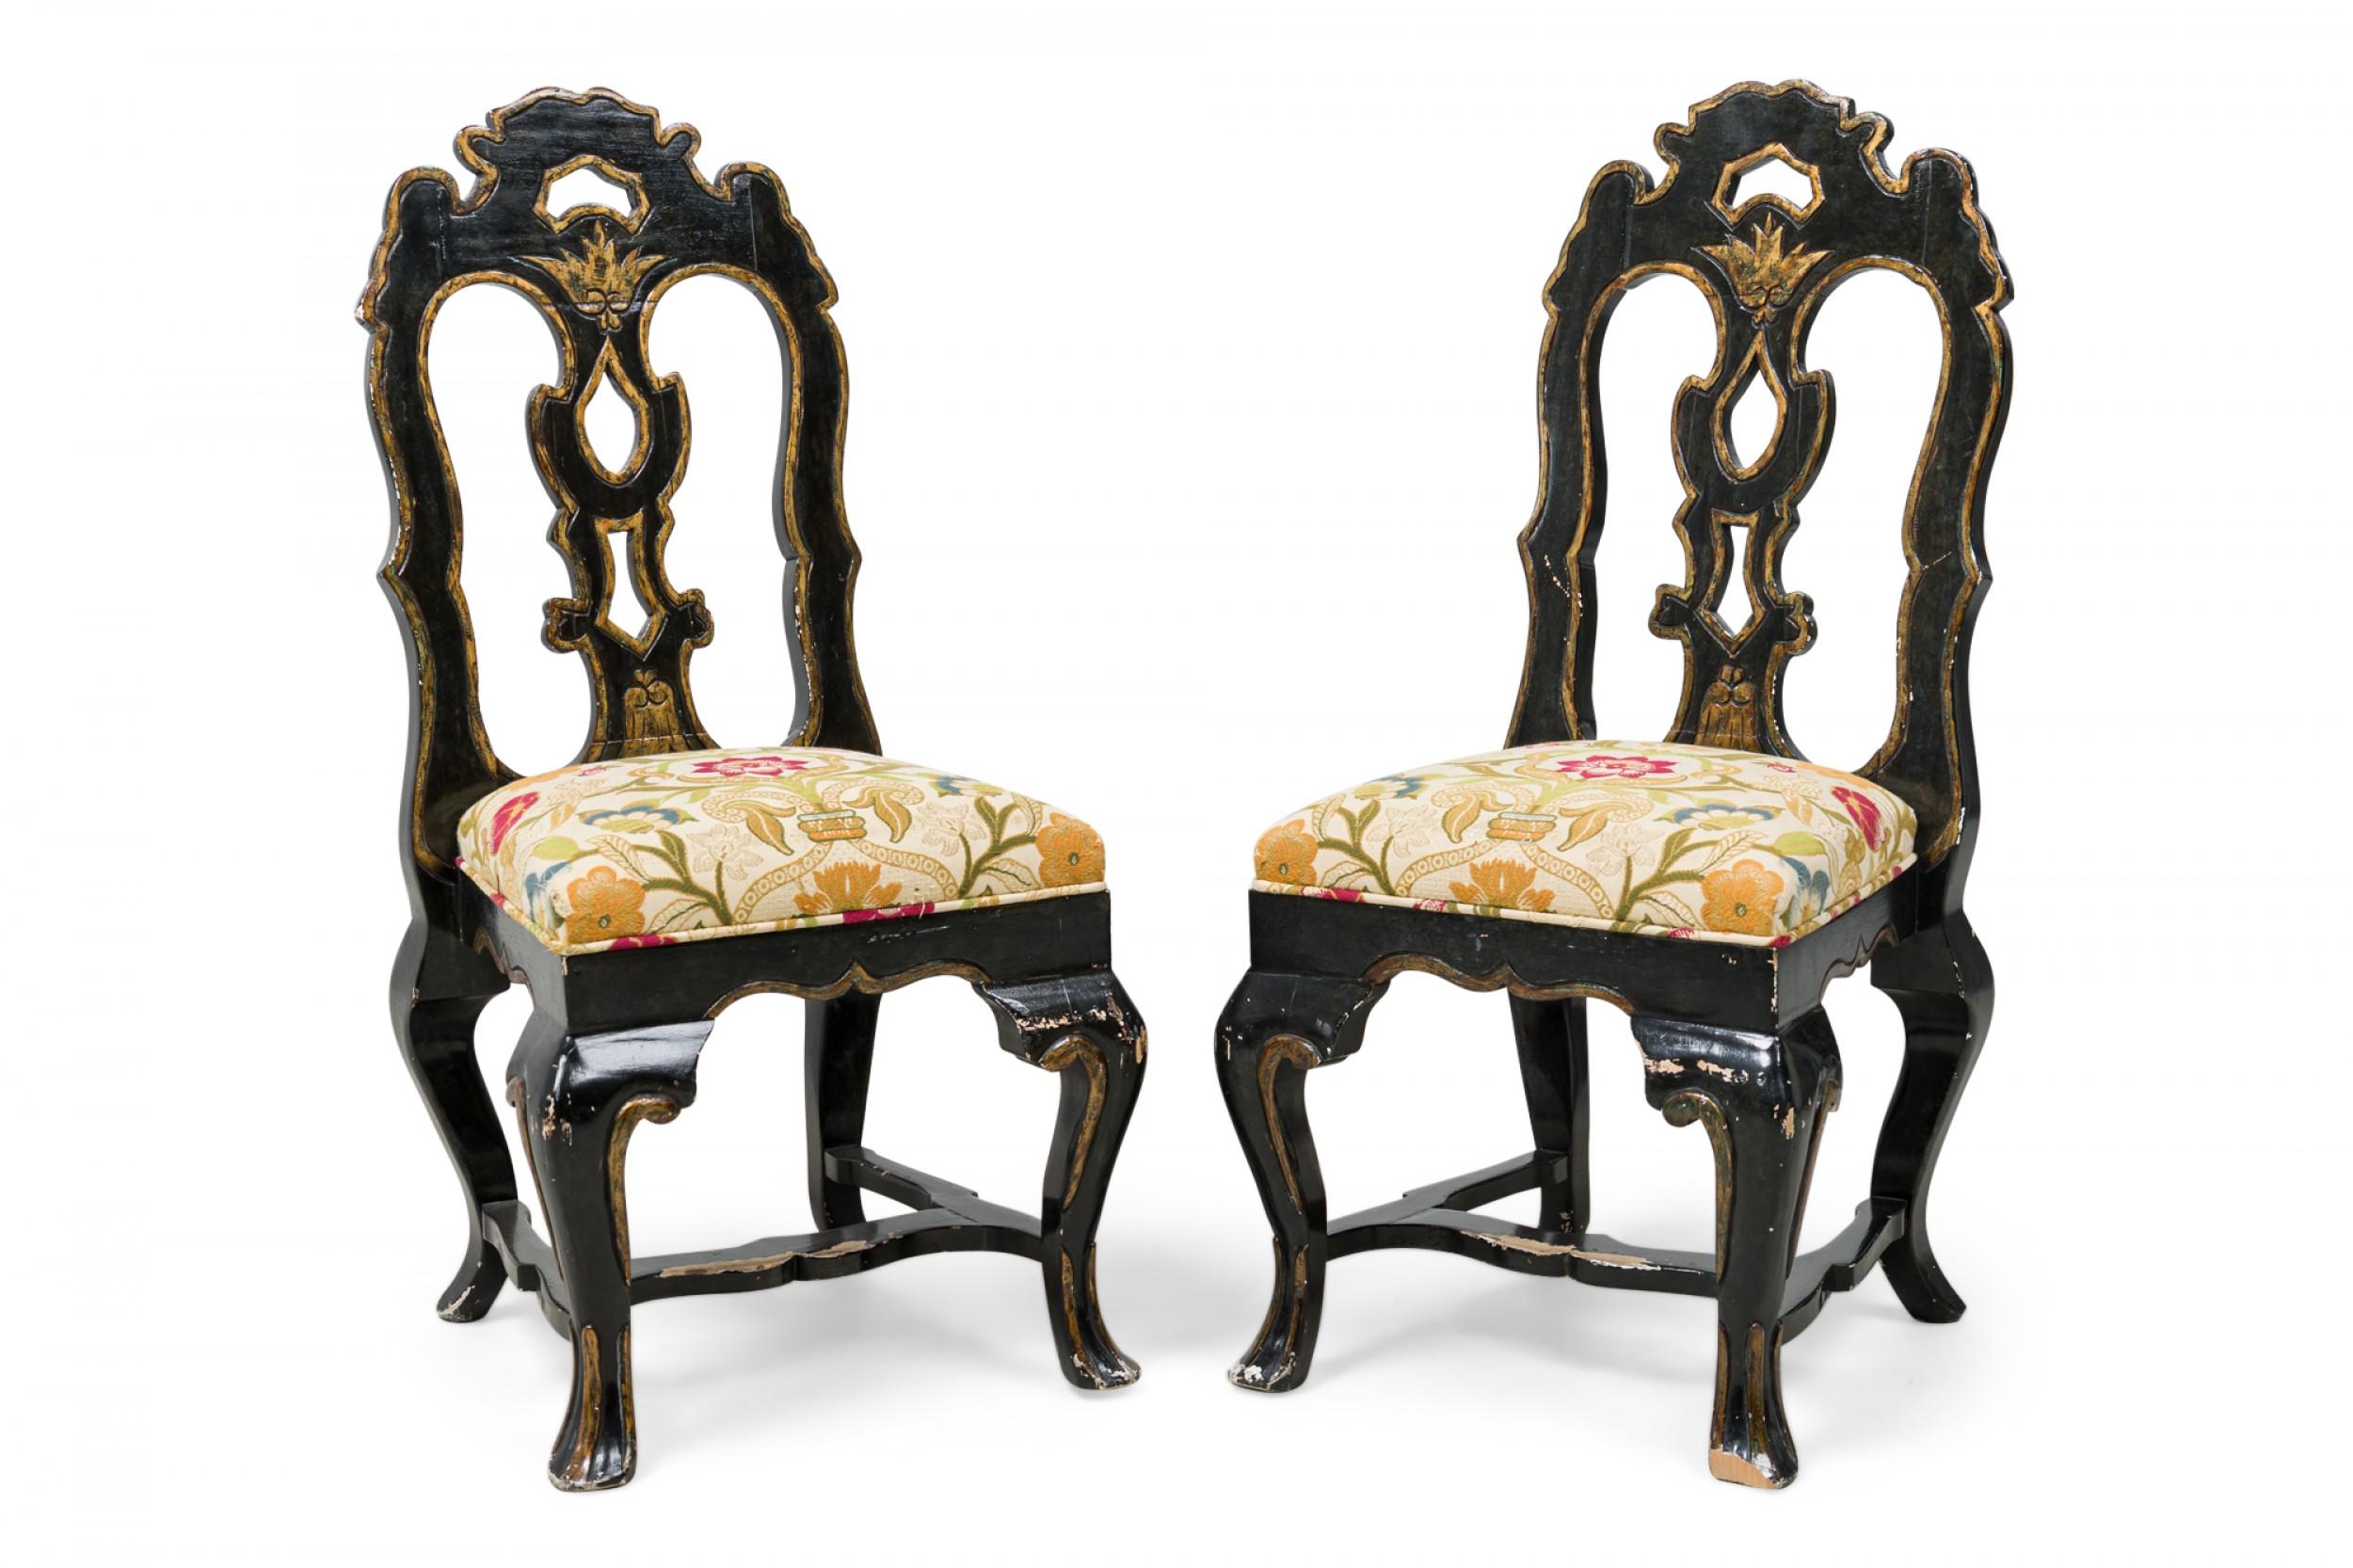 Set of 6 Portuguese Rococo Style (20th Century) black giltwood dining / side chairs featuring a shaped frame with flattened openwork back, carved splat, padded seat upholstered in a gold monotone patterned fabric accented by blue and red woven